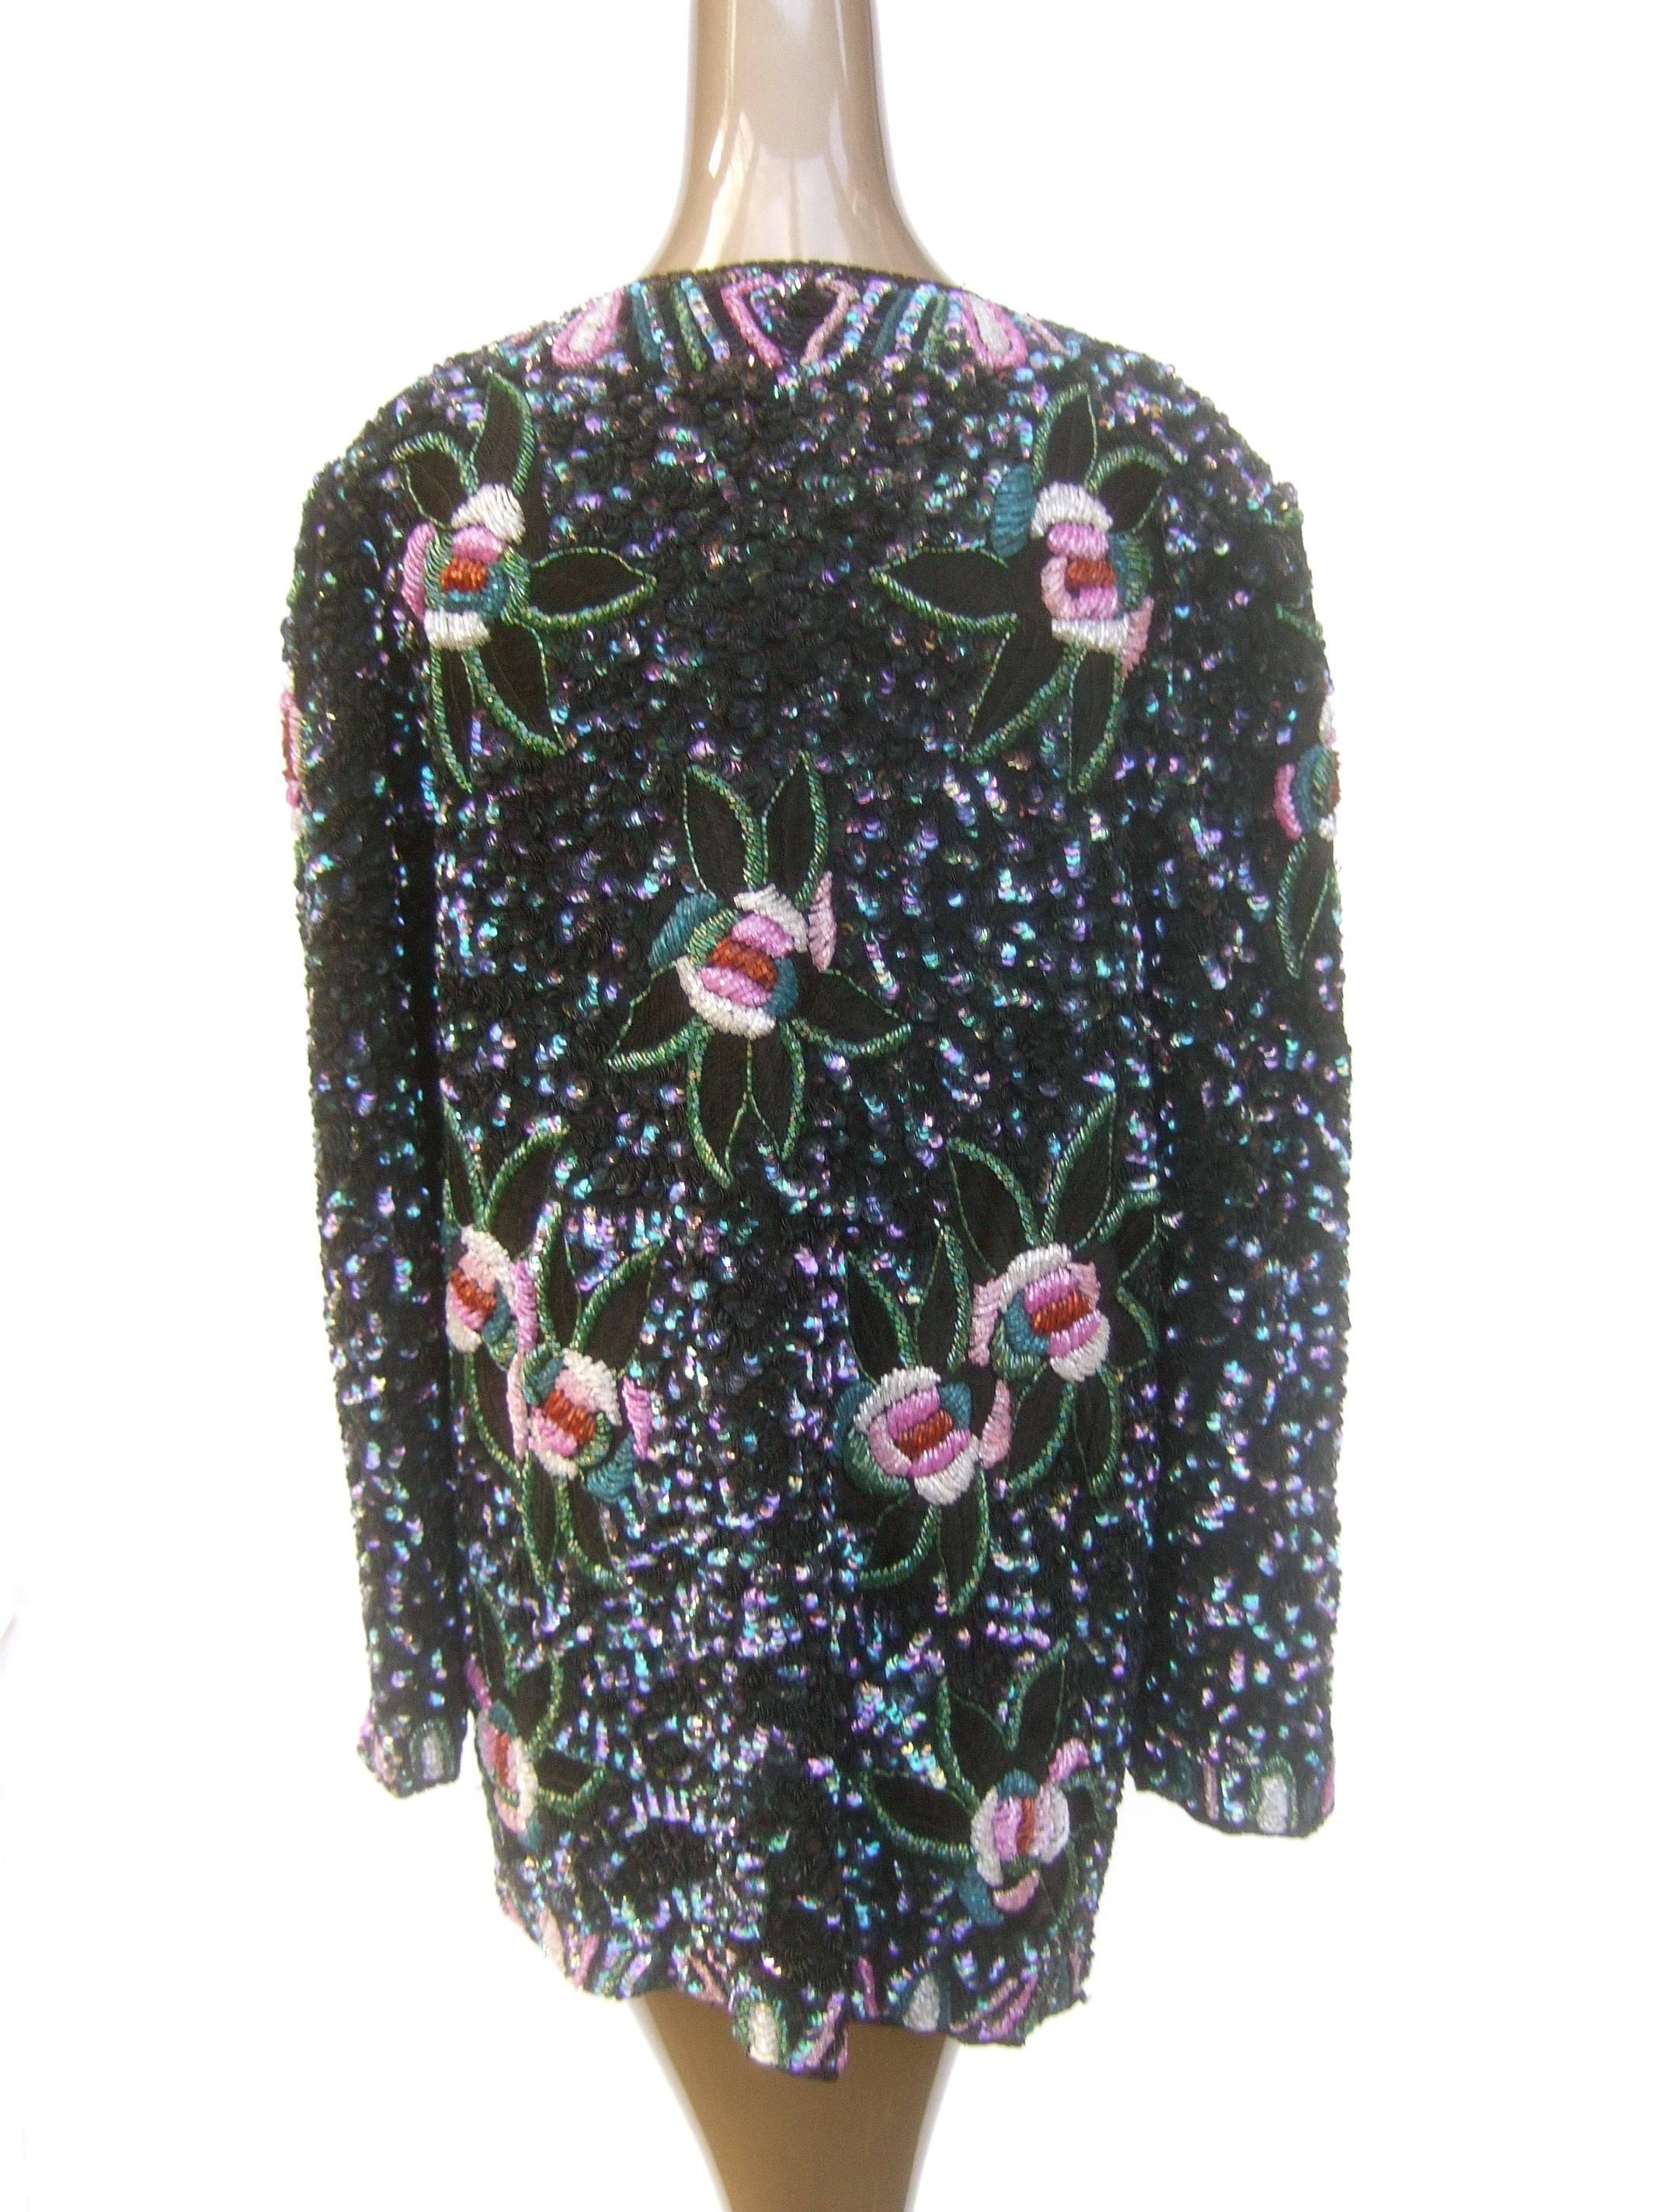 Silk Glass Beaded Sequined Evening Jacket for Saks Fifth Avenue c 1980s ...